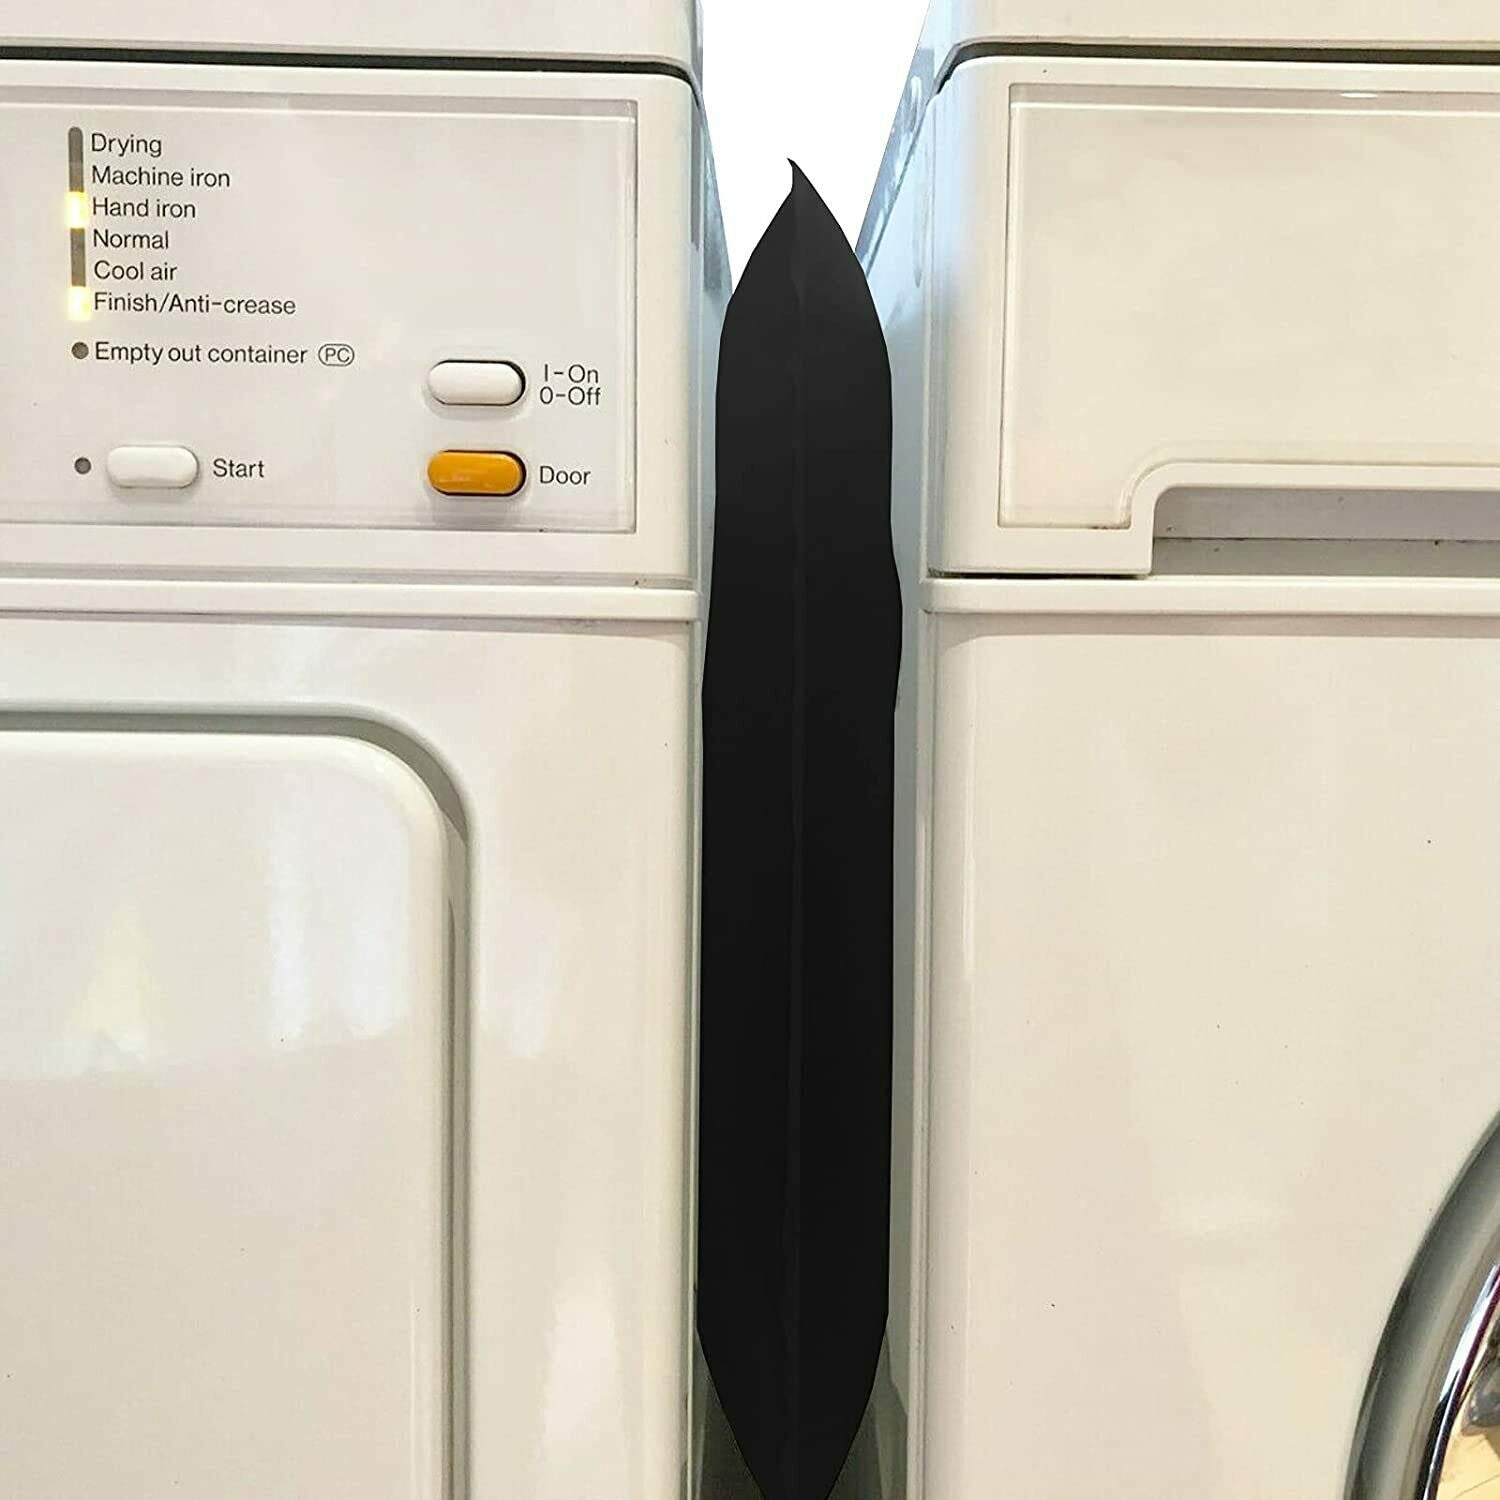 Pads can also be used in between appliances